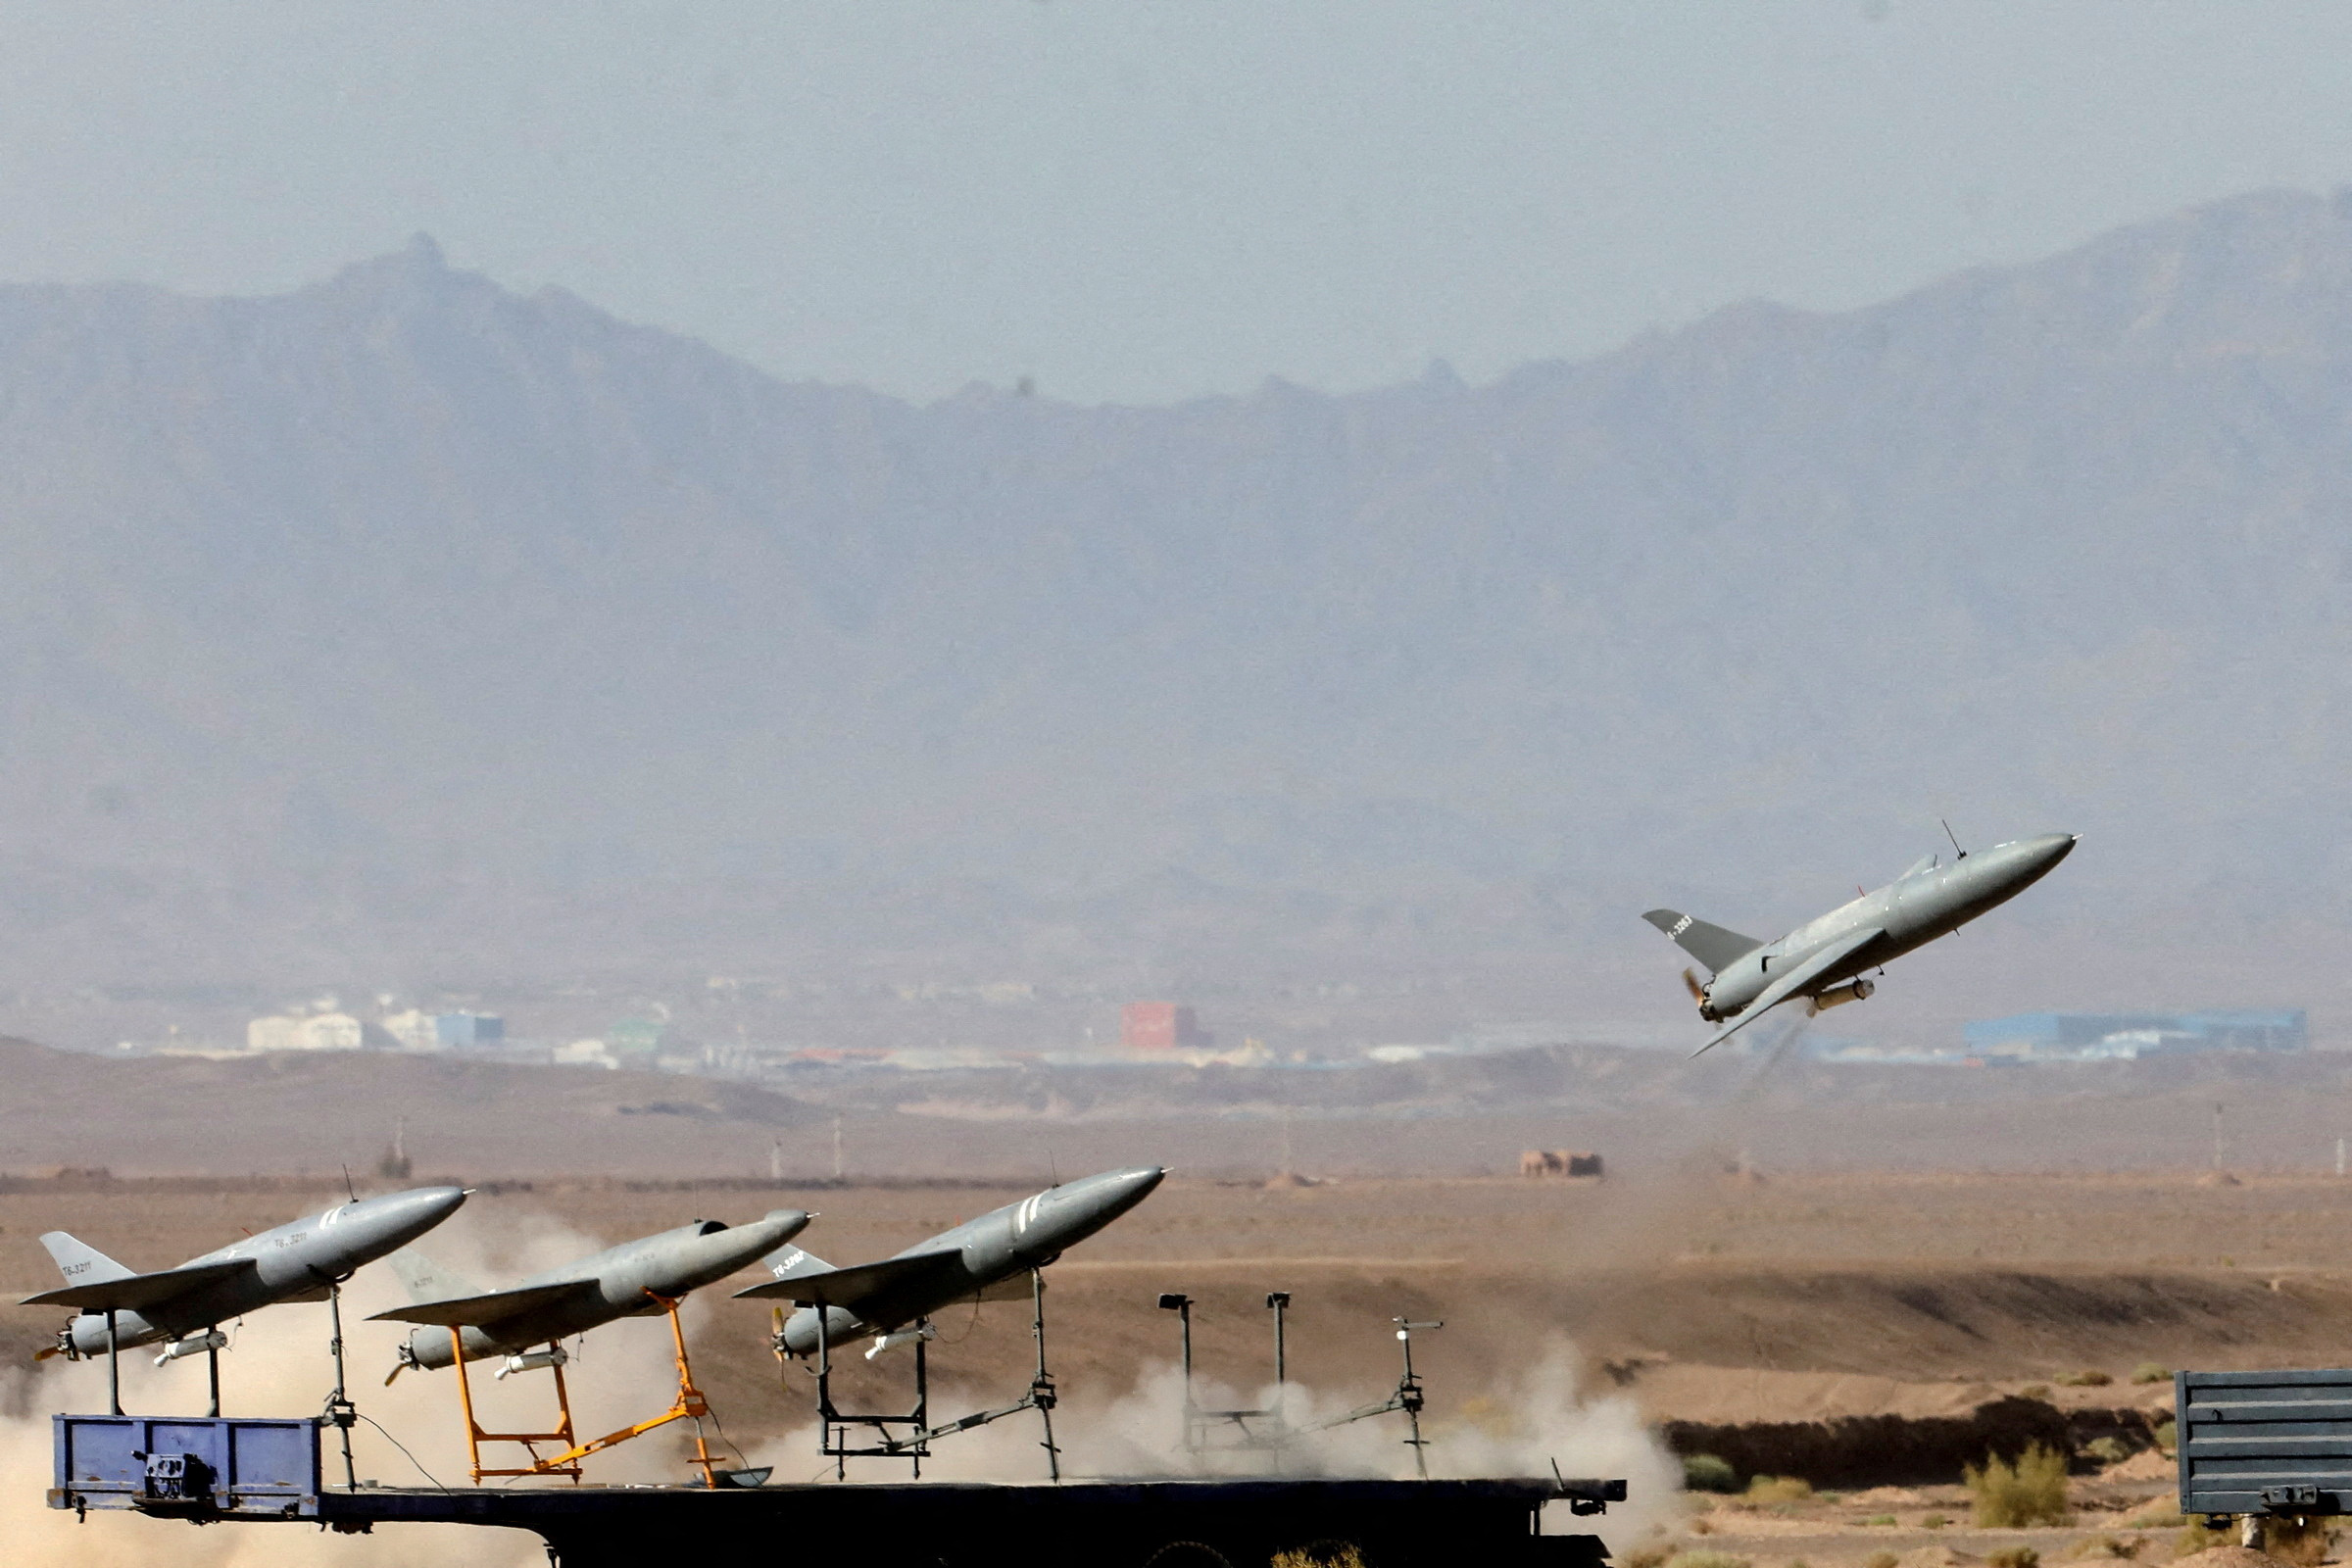 Iran acknowledged for the first time it supplied Russia with drones